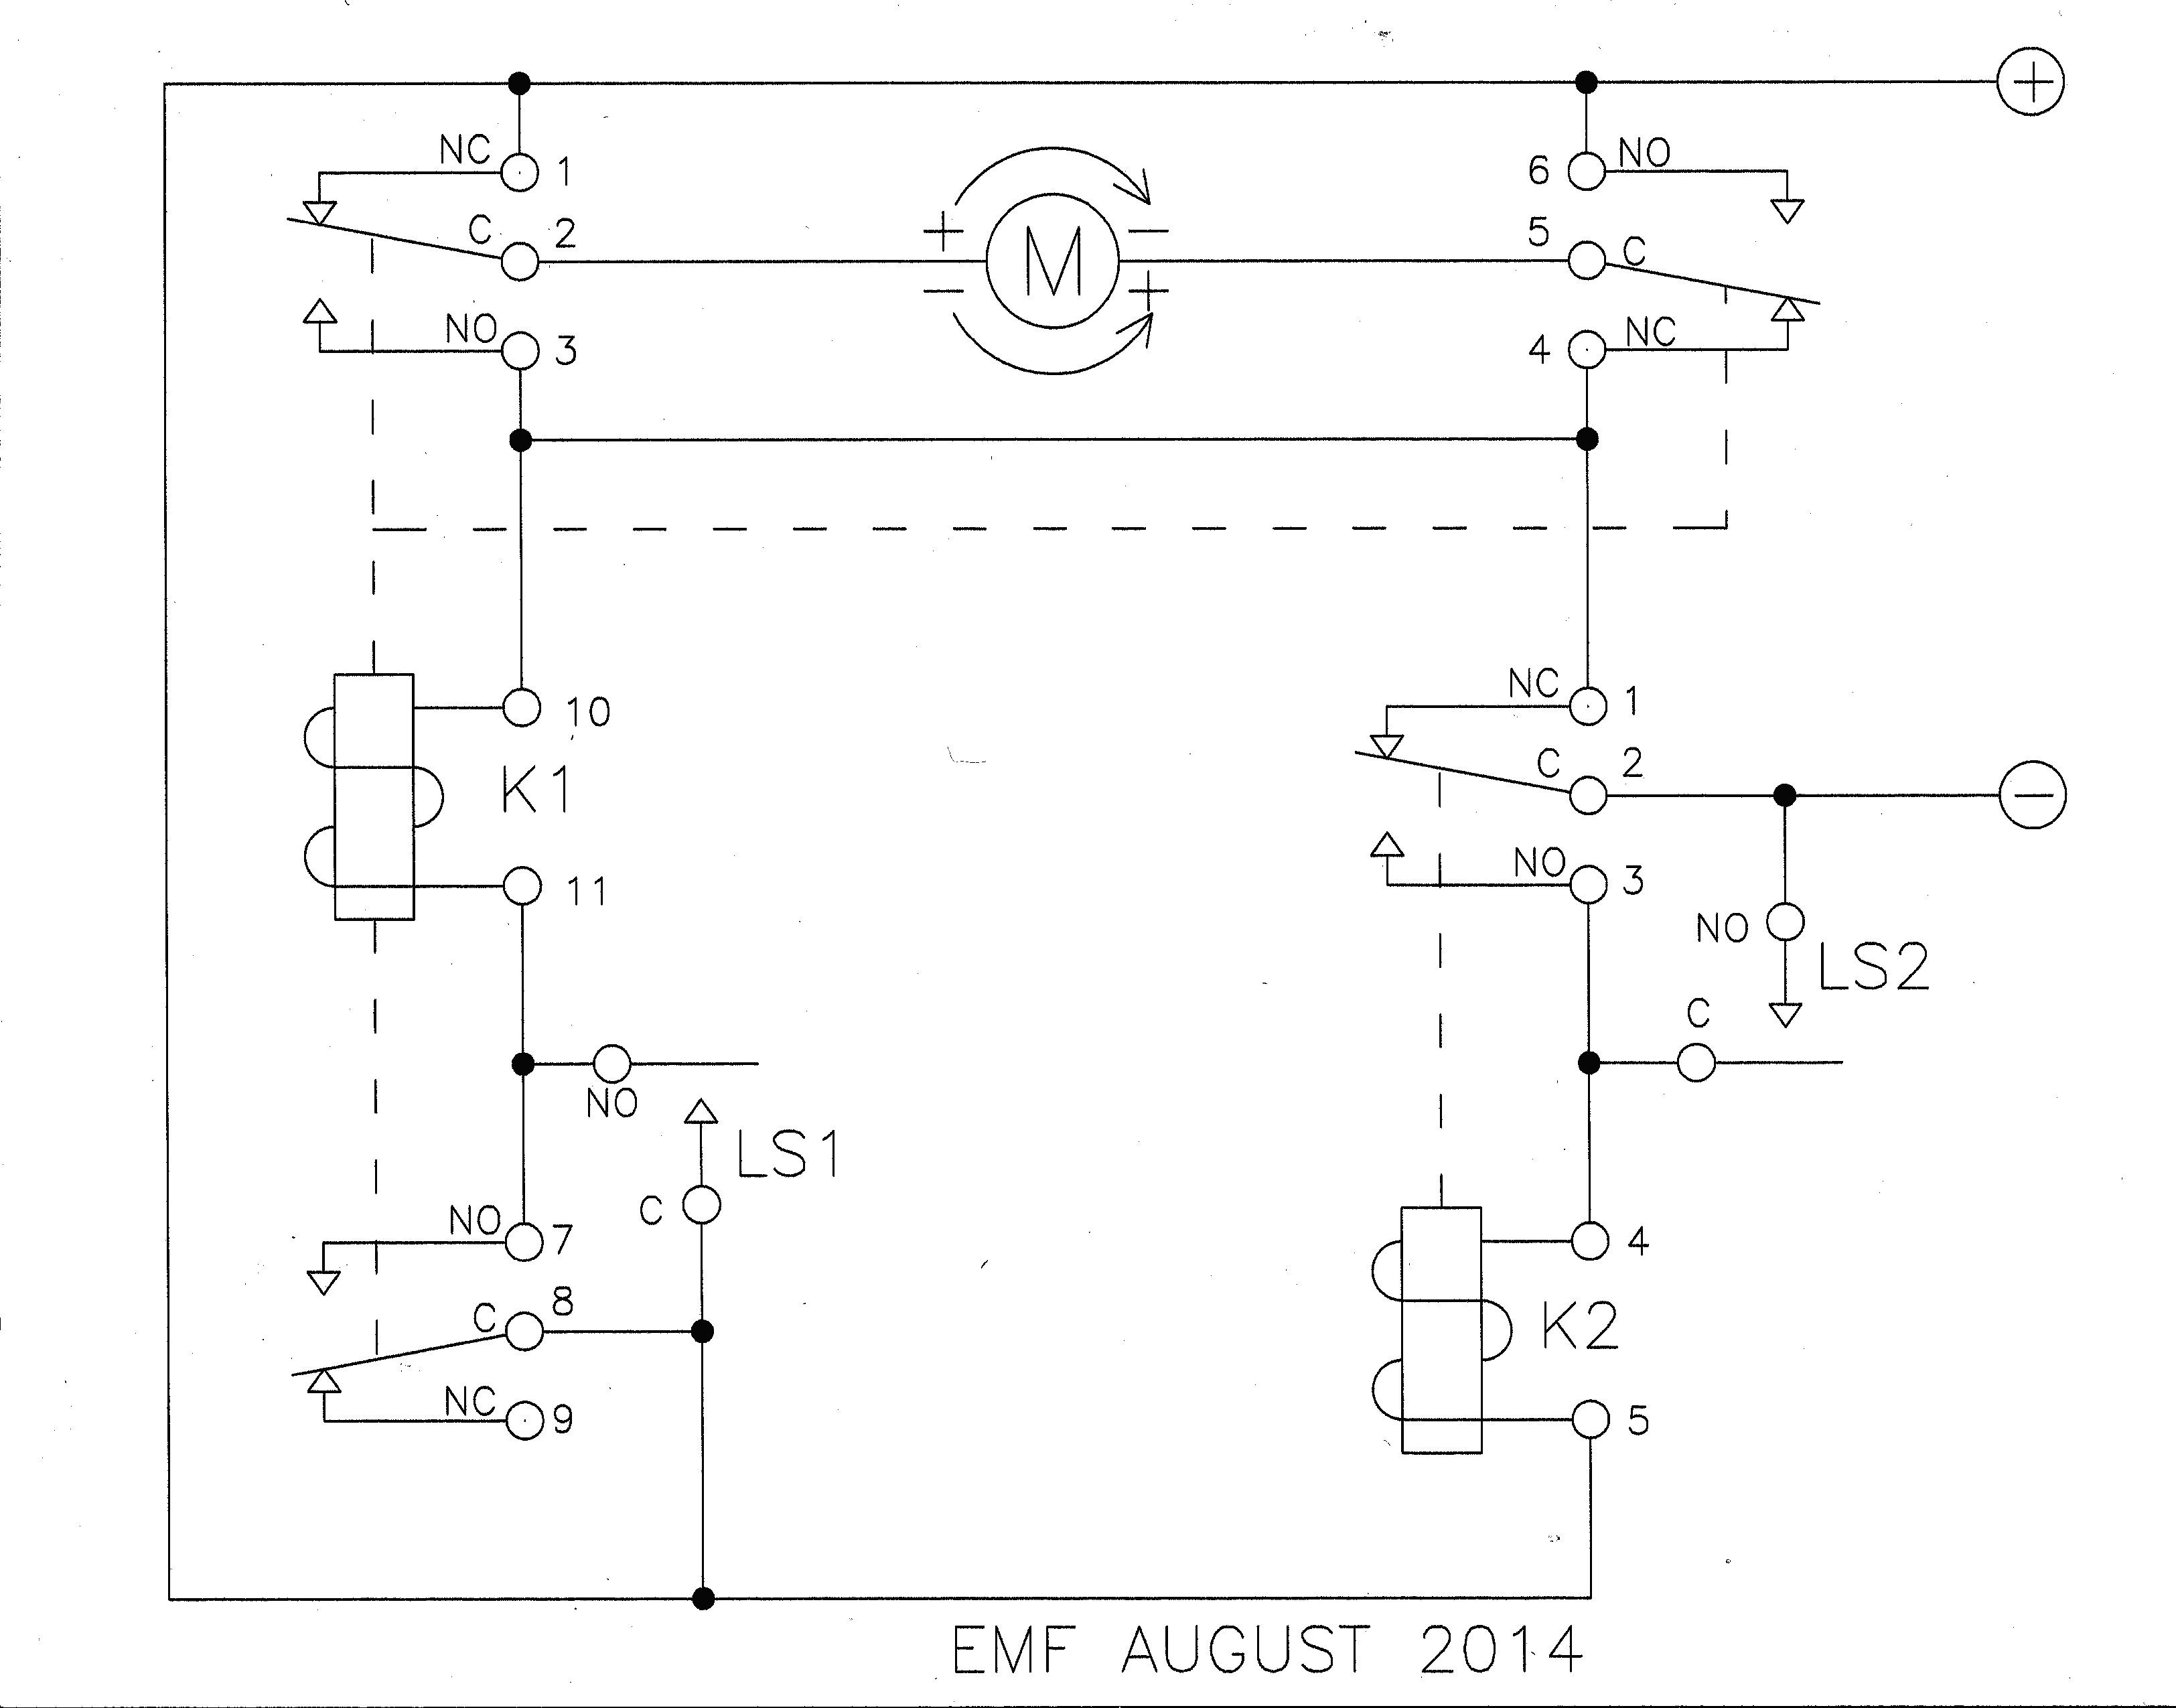 Wiring Diagram for 6 Pin Relay Fresh Awesome 5 Prong Ignition Switch Wiring Diagram